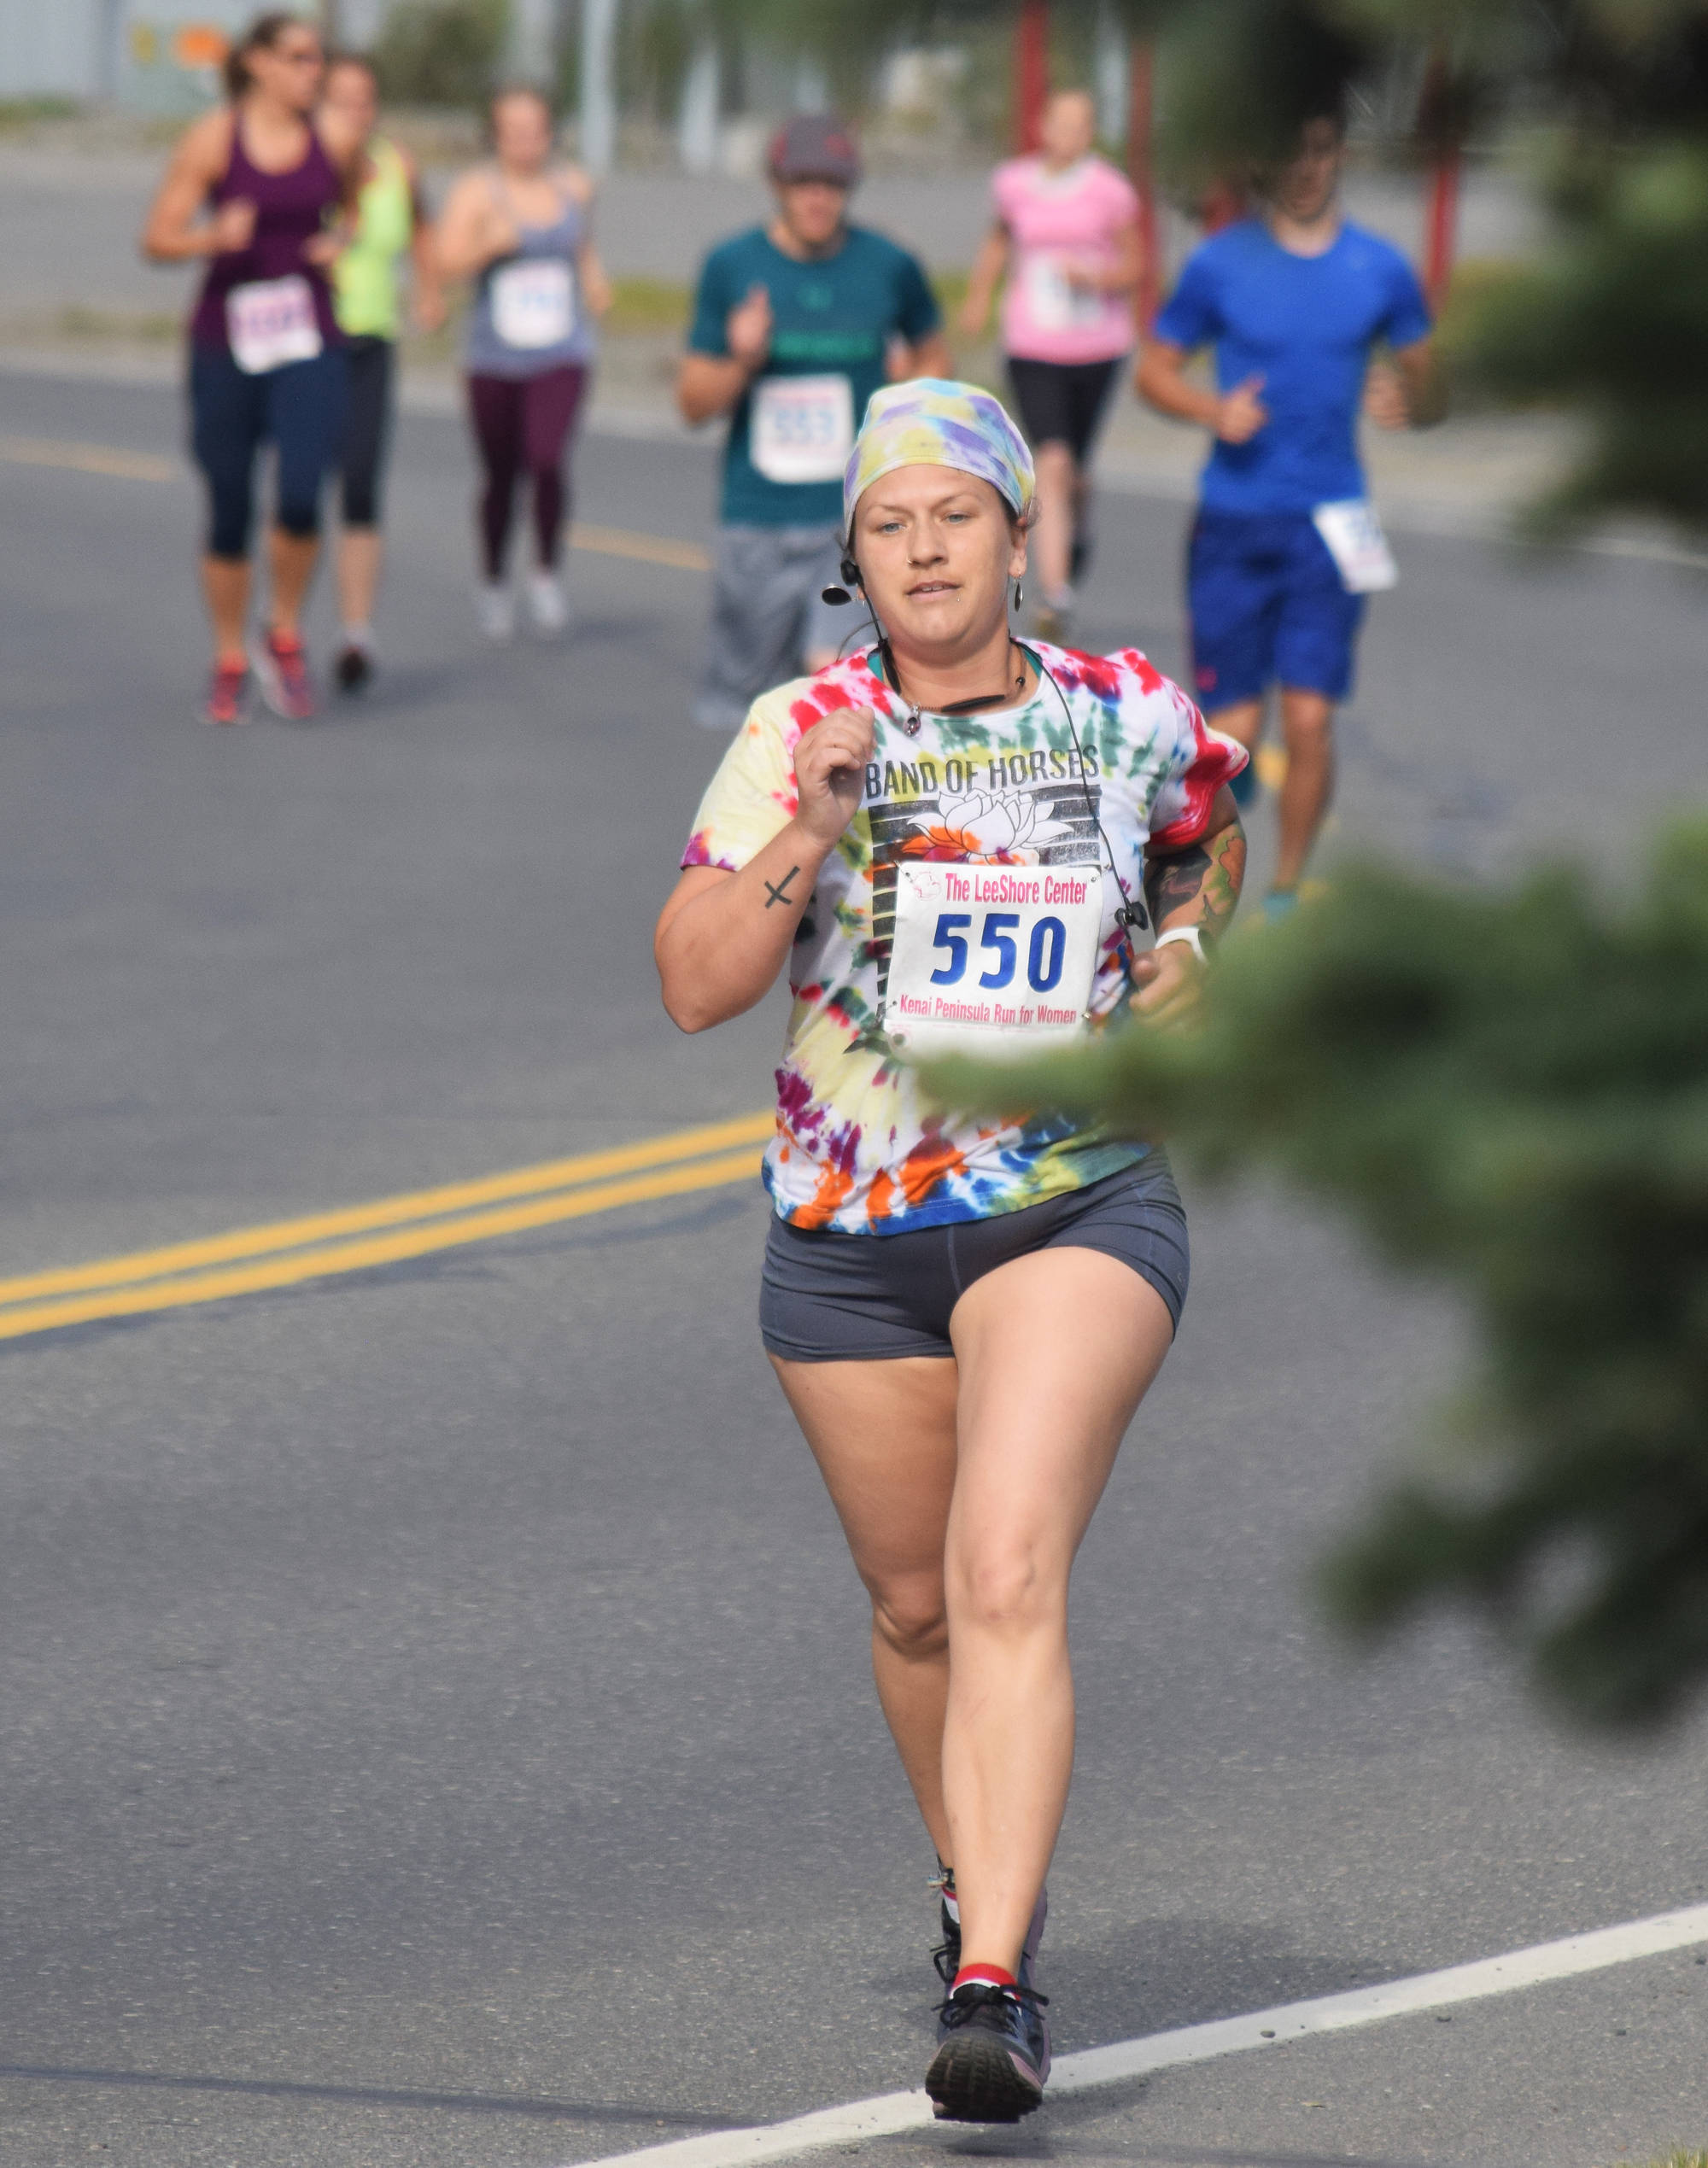 Tara Wade leads the 5K and 10K fields out Saturday, Aug. 10, 2019, at the 32nd annual Run for Women in Kenai, Alaska. (Photo by Joey Klecka/Peninsula Clarion)